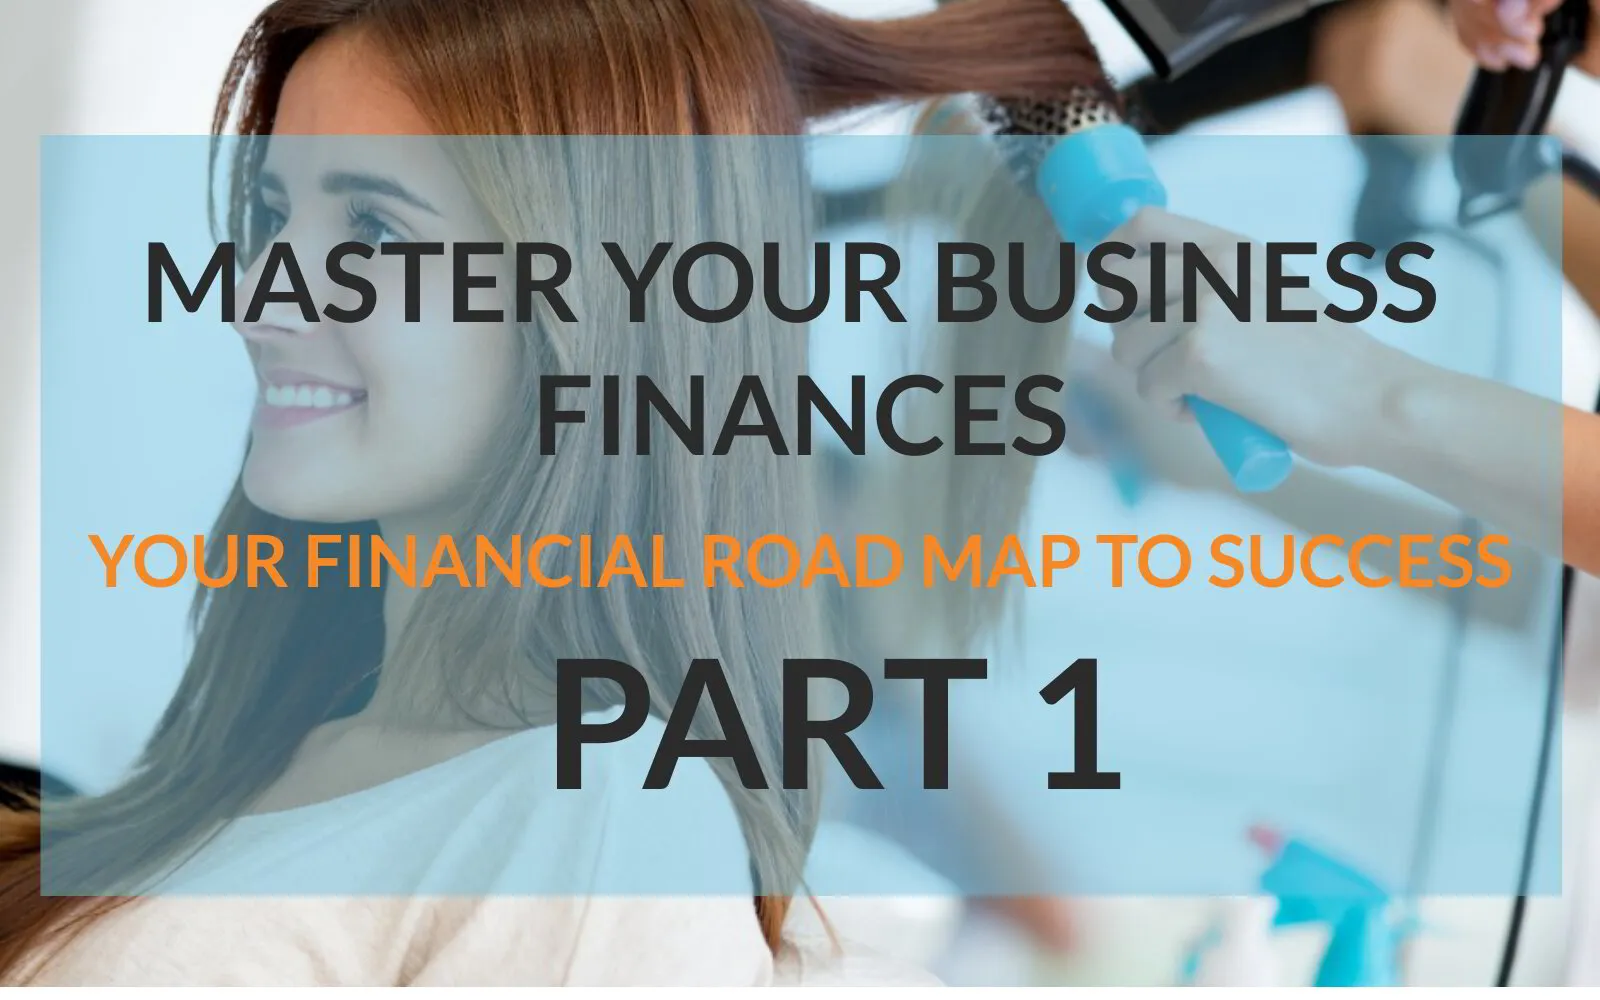 Master Your Business Finances: Your Financial Road Map To Success PART 1